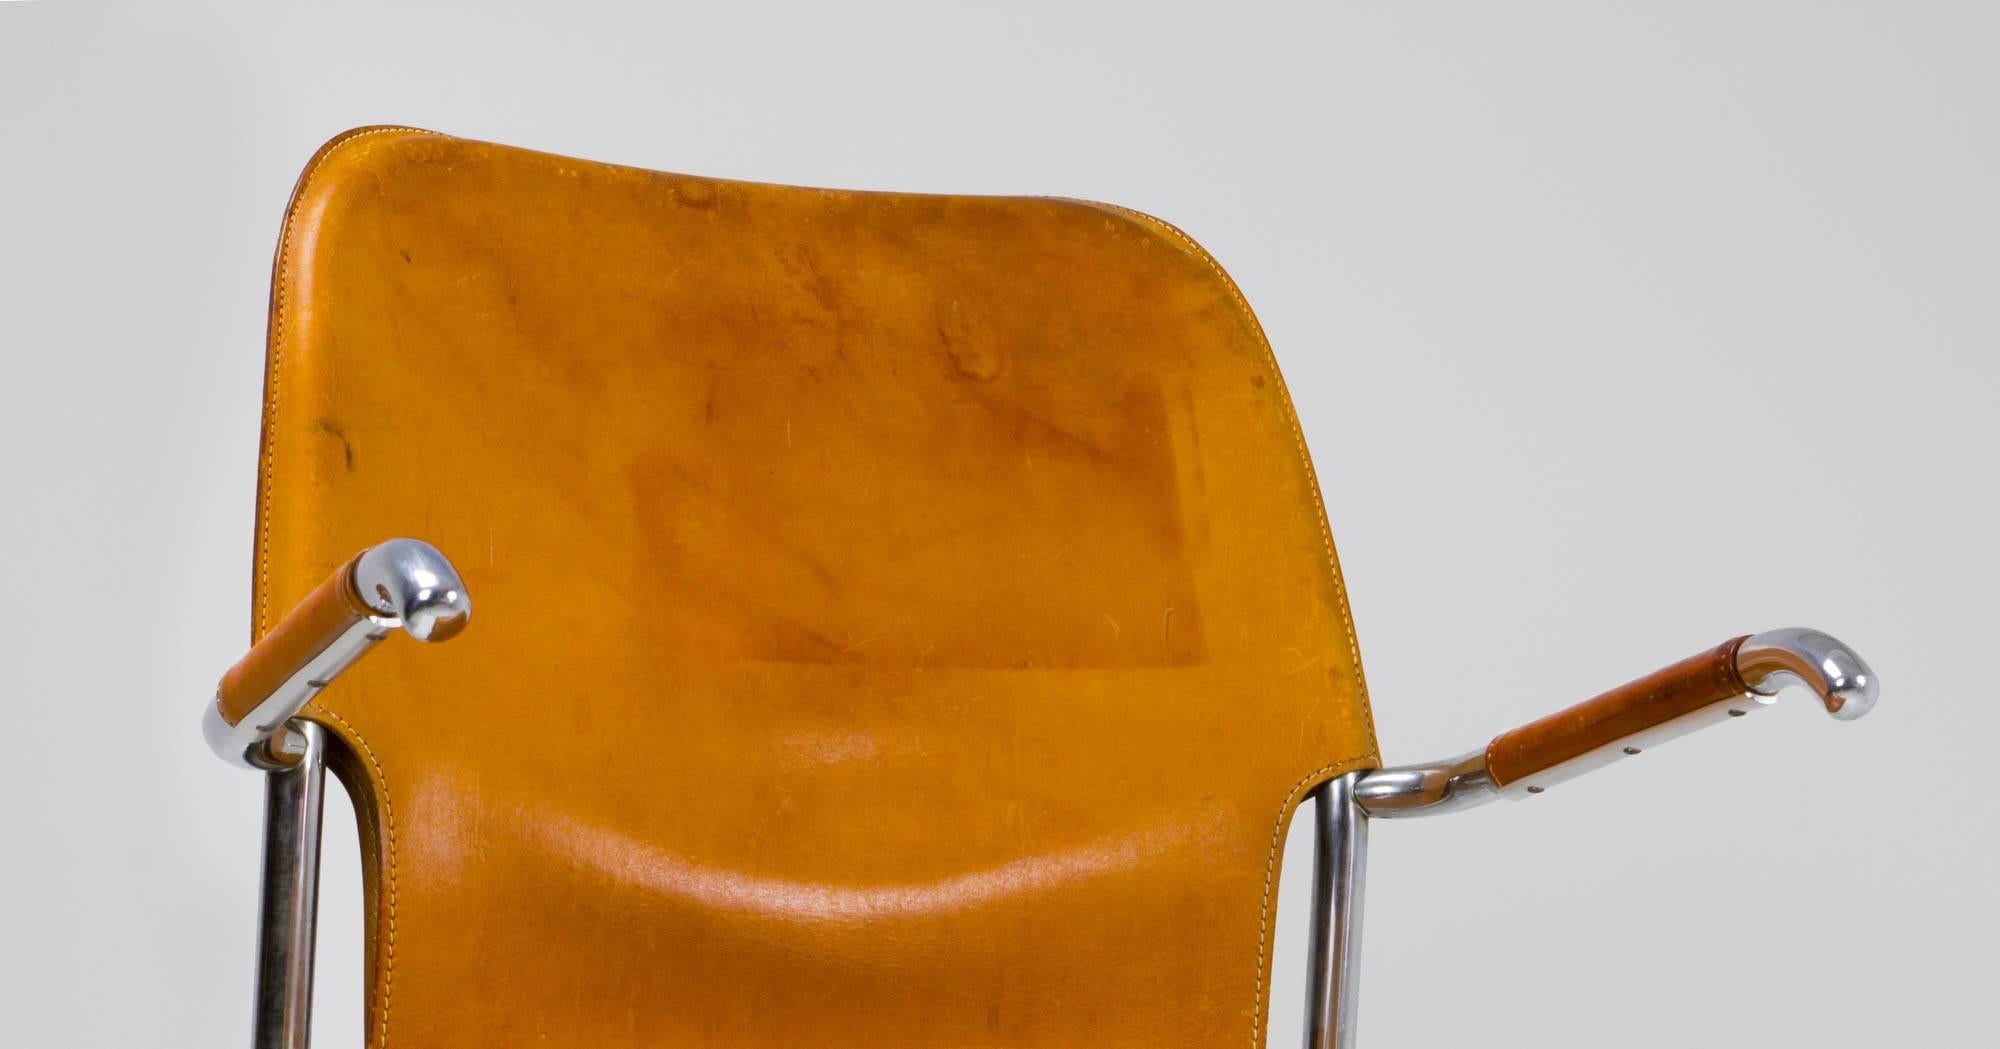 Tubular steel cantilevered armchair by Kenneth Bergenblad for DUX with well-weathered cognac leather stretched around a minimal frame, with leather wrapped single tube arm rests.